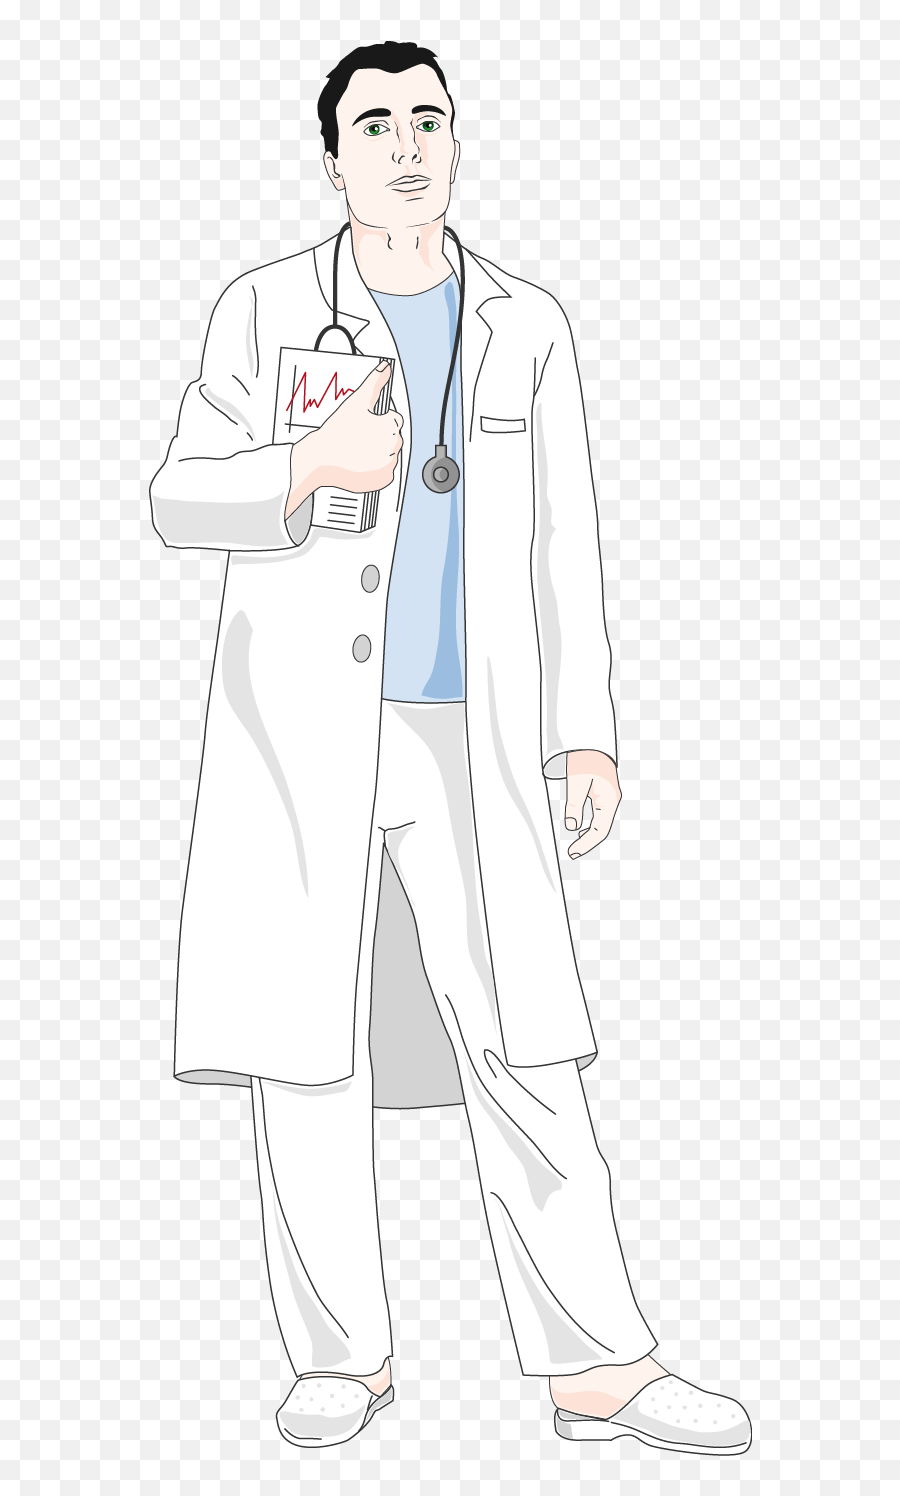 Physician Clip Art - Doctor Cliparts Png Download 8001514 Illustration,Doctor Clipart Png